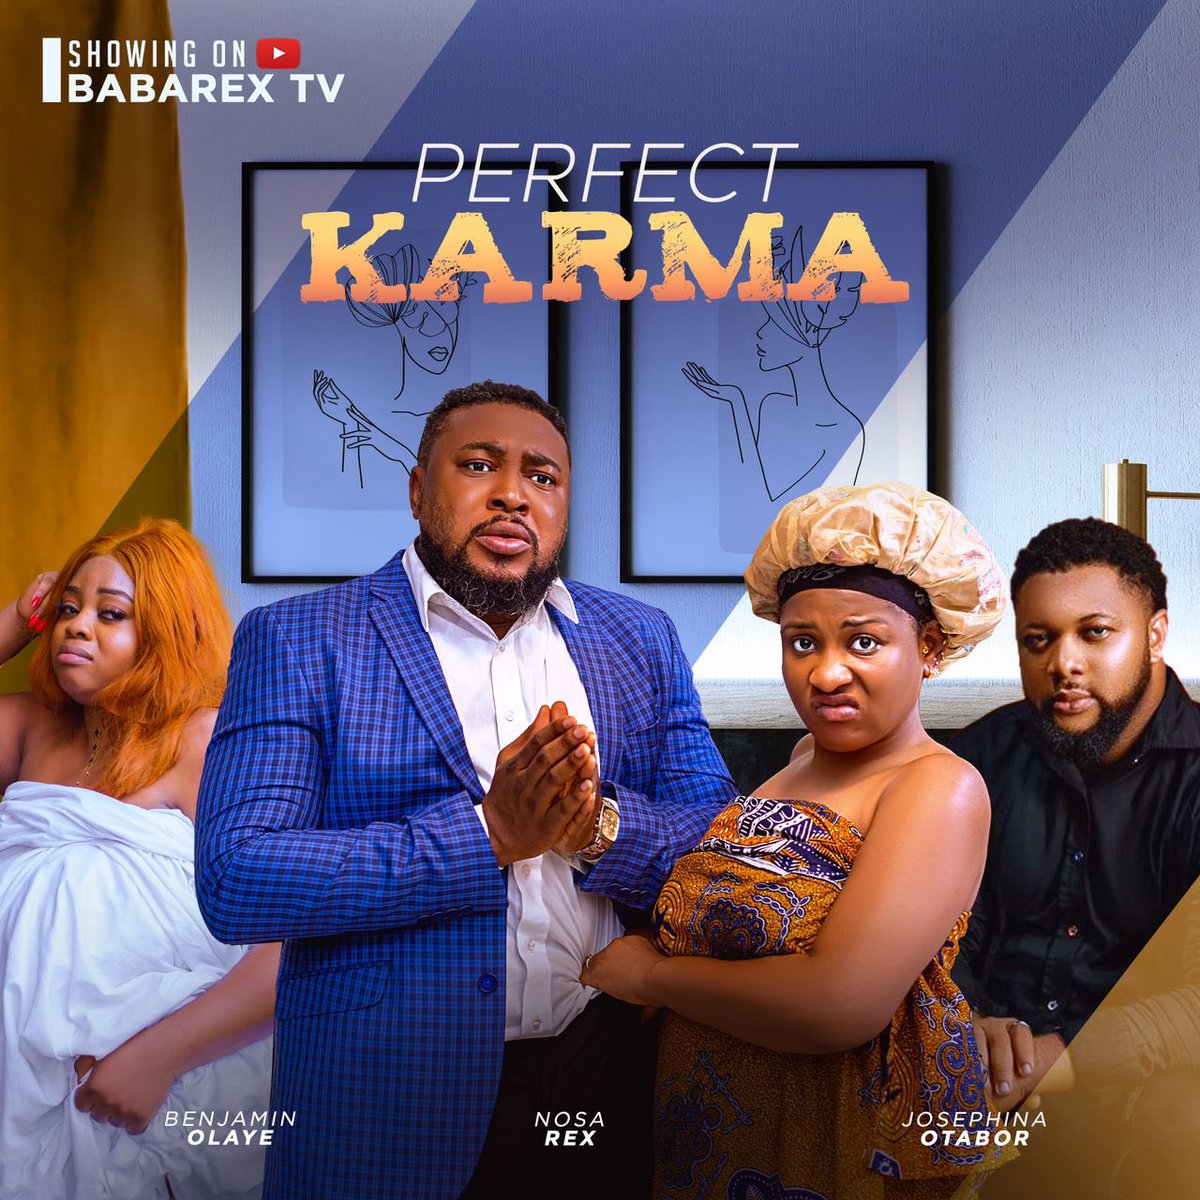 Hurry to YouTube ooh make we use this film take hold side oooooh life is hard watch perfect karma to ease your soul and body 💃🏼 BABAREX TV 💃🏼💃🏼💃🏼💃🏼💃🏼